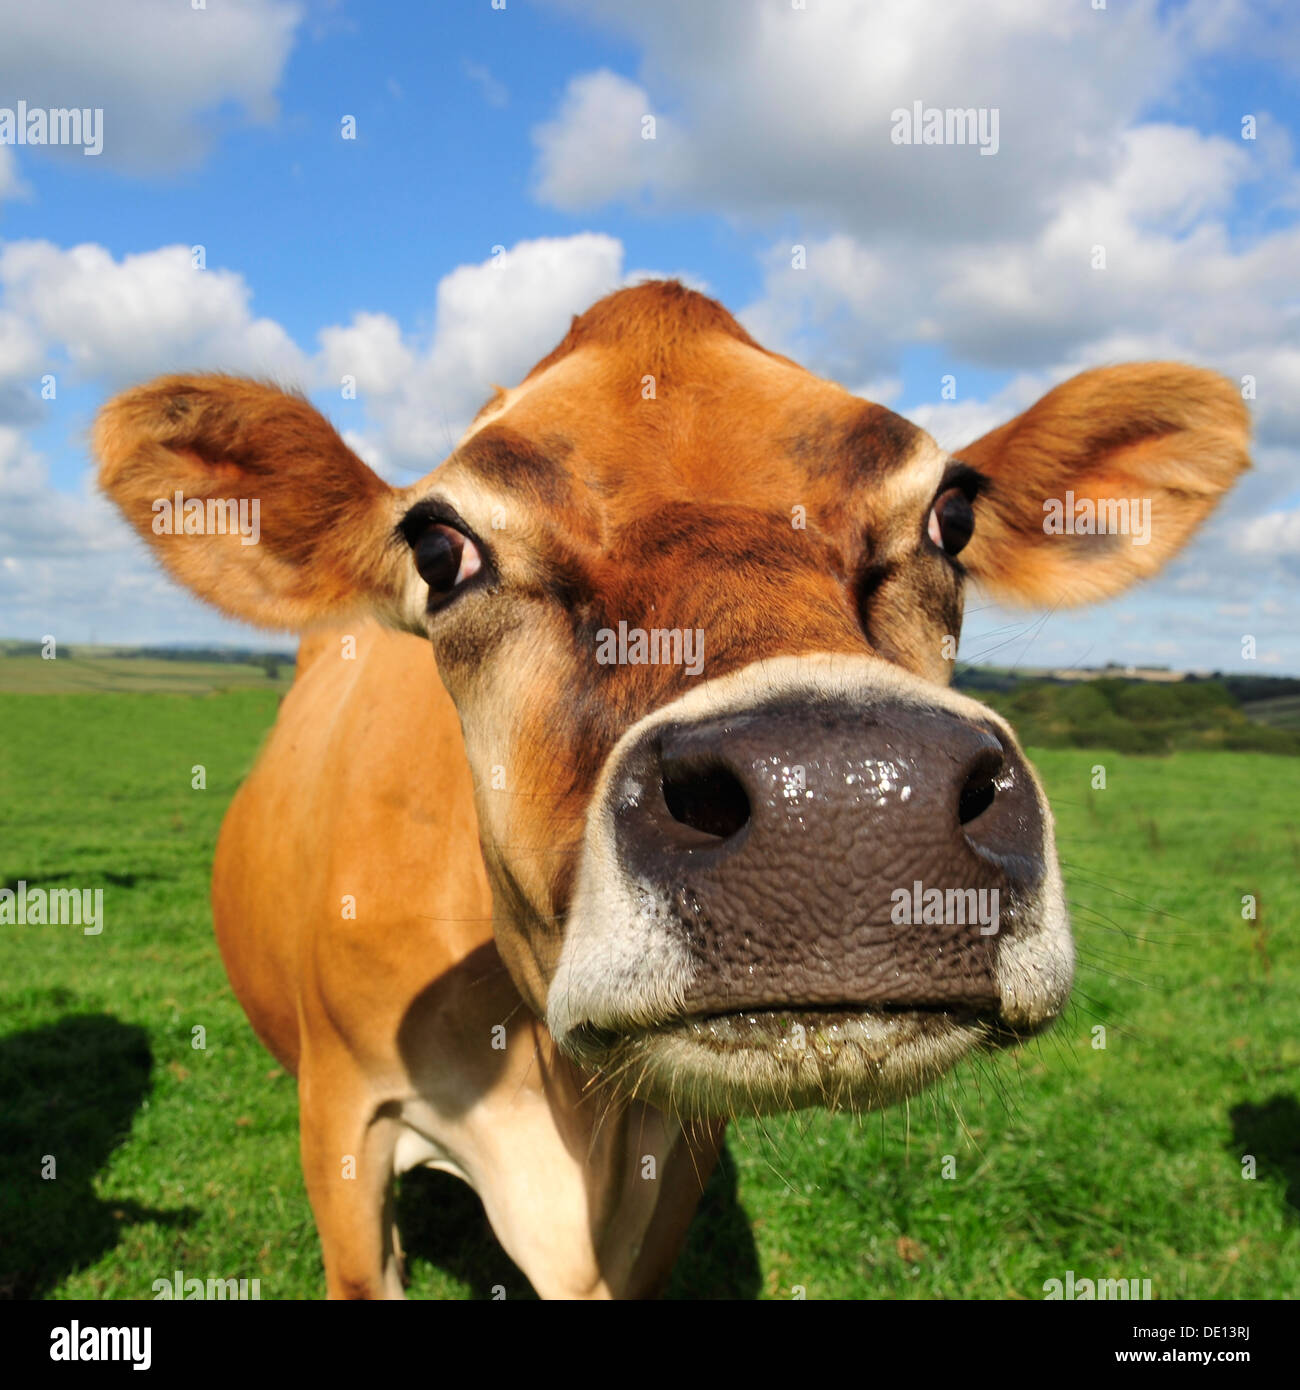 jersey cow pictures